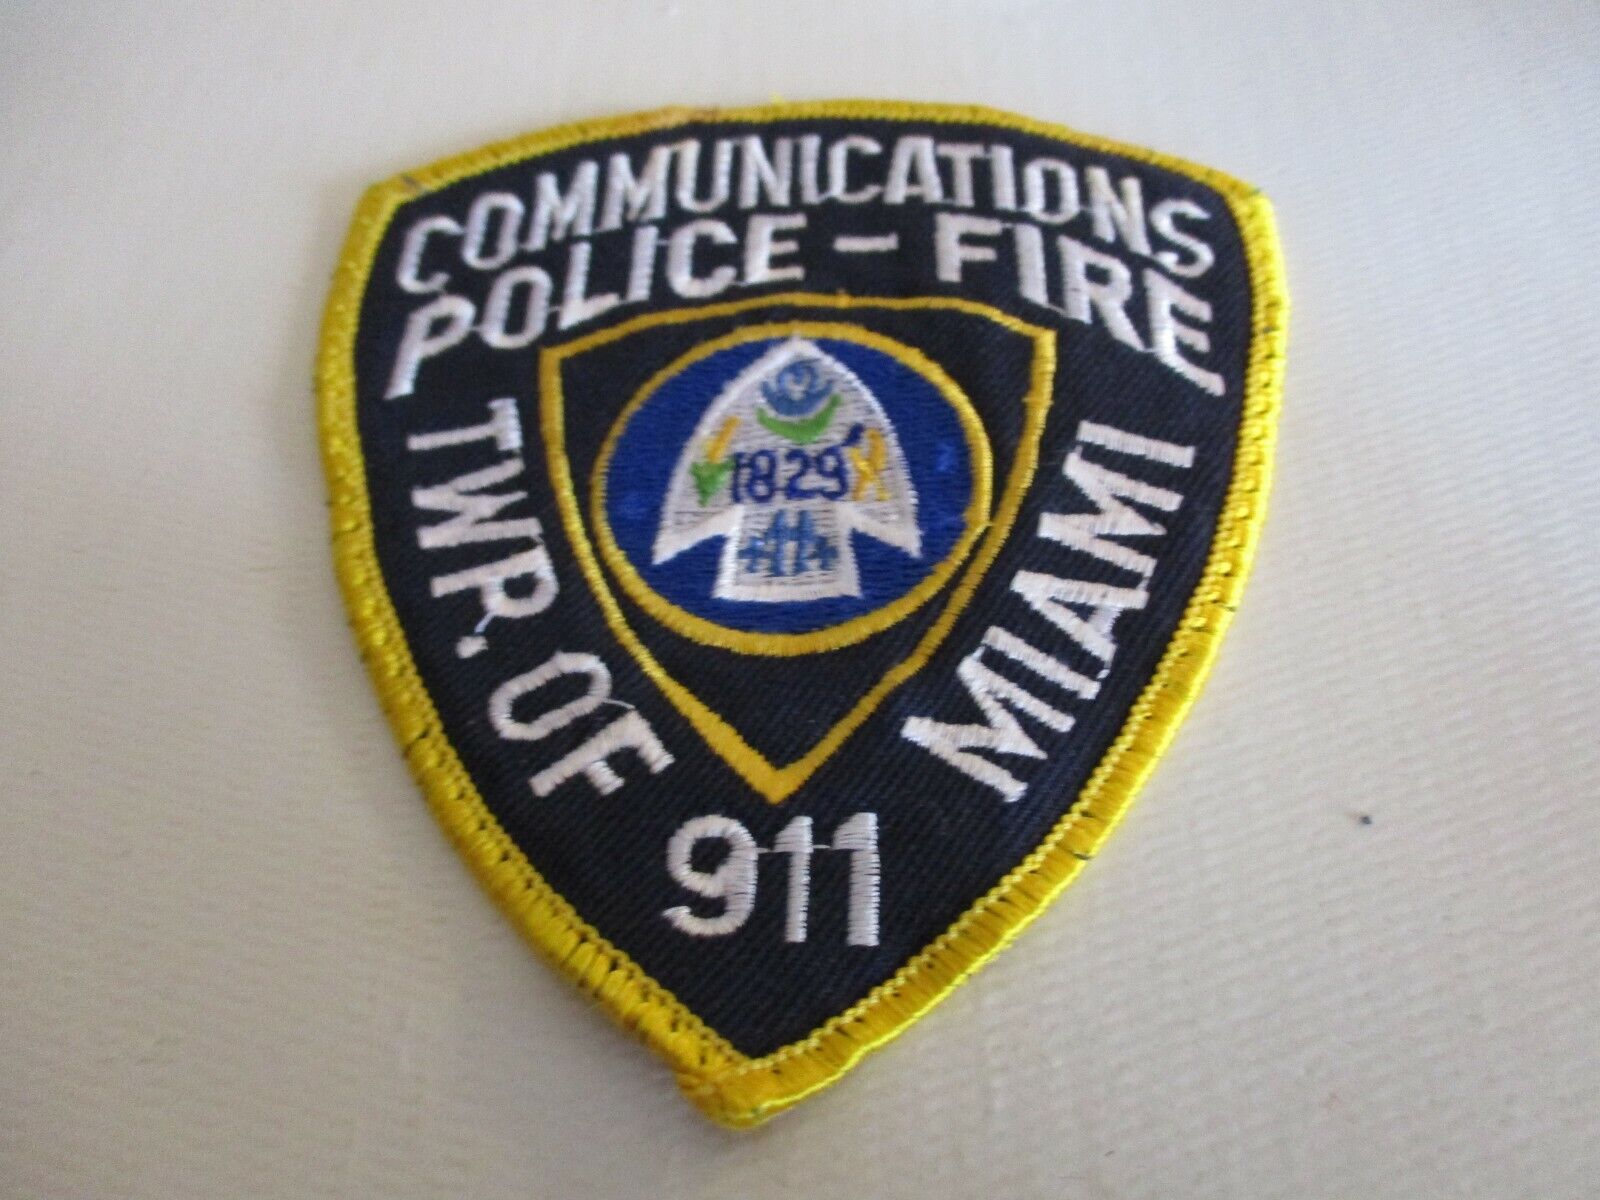 Township of Miami Ohio Communications Emergency 911 Police Fire Shoulder Patch